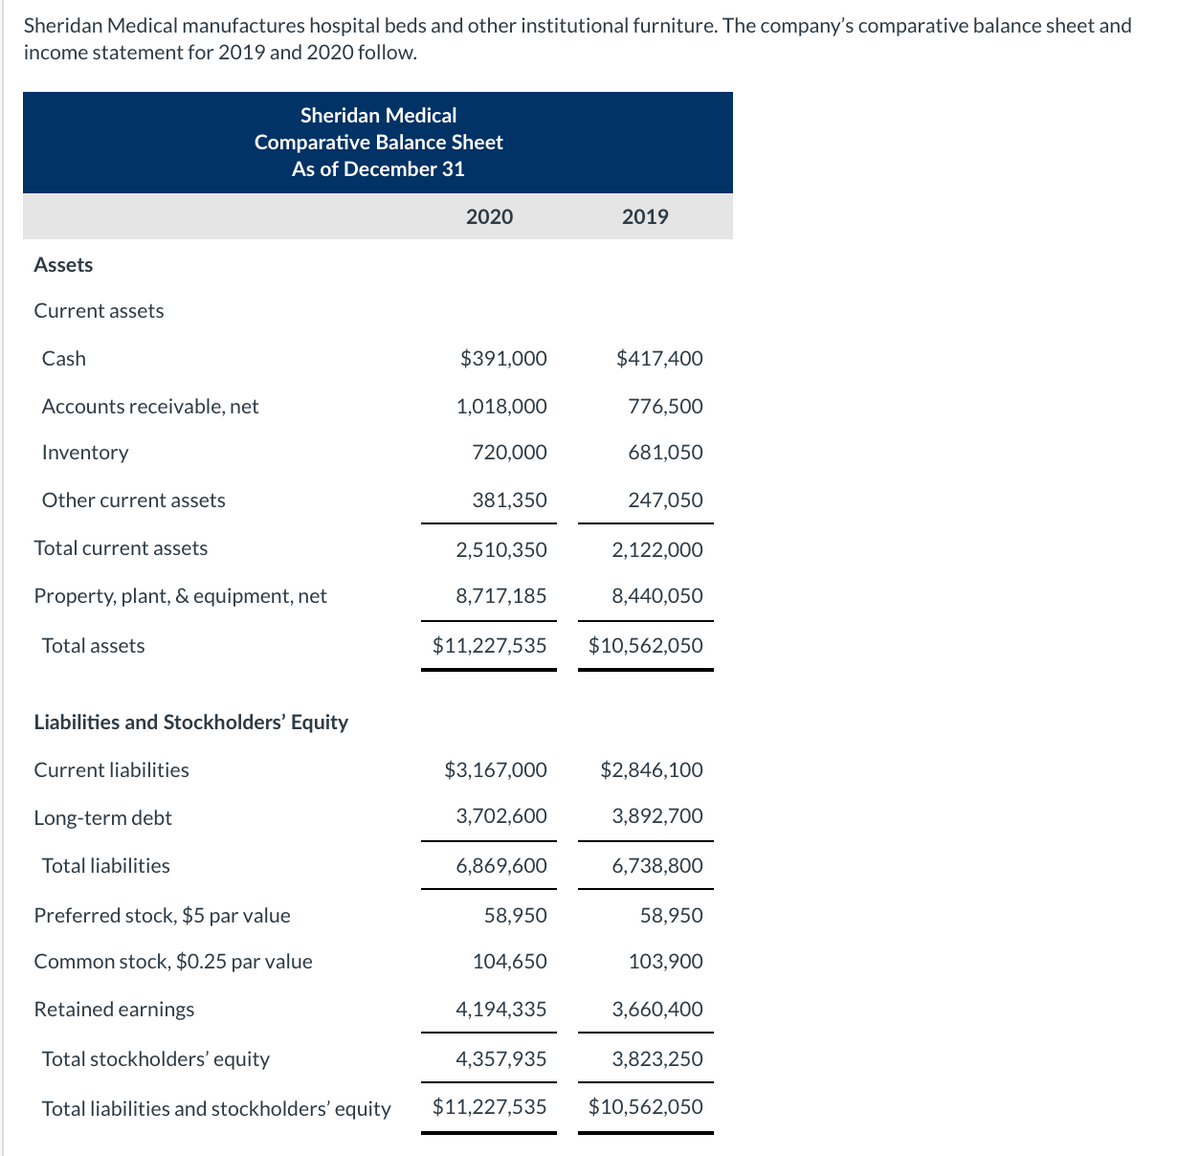 Sheridan Medical manufactures hospital beds and other institutional furniture. The company's comparative balance sheet and
income statement for 2019 and 2020 follow.
Sheridan Medical
Comparative Balance Sheet
As of December 31
2020
2019
Assets
Current assets
Cash
$391,000
$417,400
Accounts receivable, net
1,018,000
776,500
Inventory
720,000
681,050
Other current assets
381,350
247,050
Total current assets
2,510,350
2,122,000
Property, plant, & equipment, net
8,717,185
8,440,050
Total assets
$11,227,535
$10,562,050
Liabilities and Stockholders' Equity
Current liabilities
$3,167,000
$2,846,100
Long-term debt
3,702,600
3,892,700
Total liabilities
6,869,600
6,738,800
Preferred stock, $5 par value
58,950
58,950
Common stock, $0.25 par value
104,650
103,900
Retained earnings
4,194,335
3,660,400
Total stockholders' equity
4,357,935
3,823,250
Total liabilities and stockholders' equity
$11,227,535
$10,562,050
